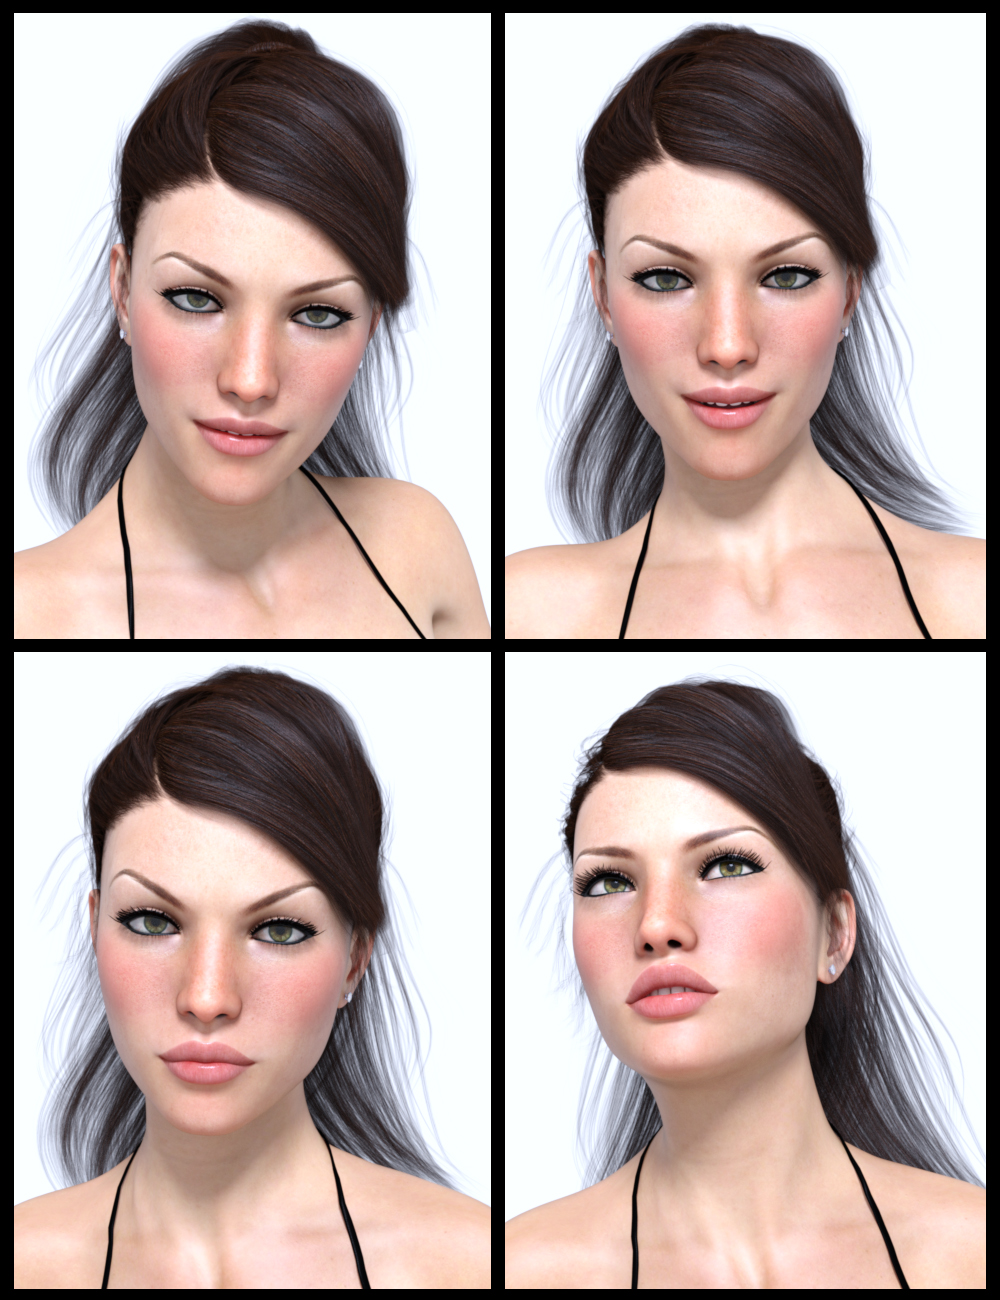 Details for Genesis 3 Female(s) by: lunchlady, 3D Models by Daz 3D